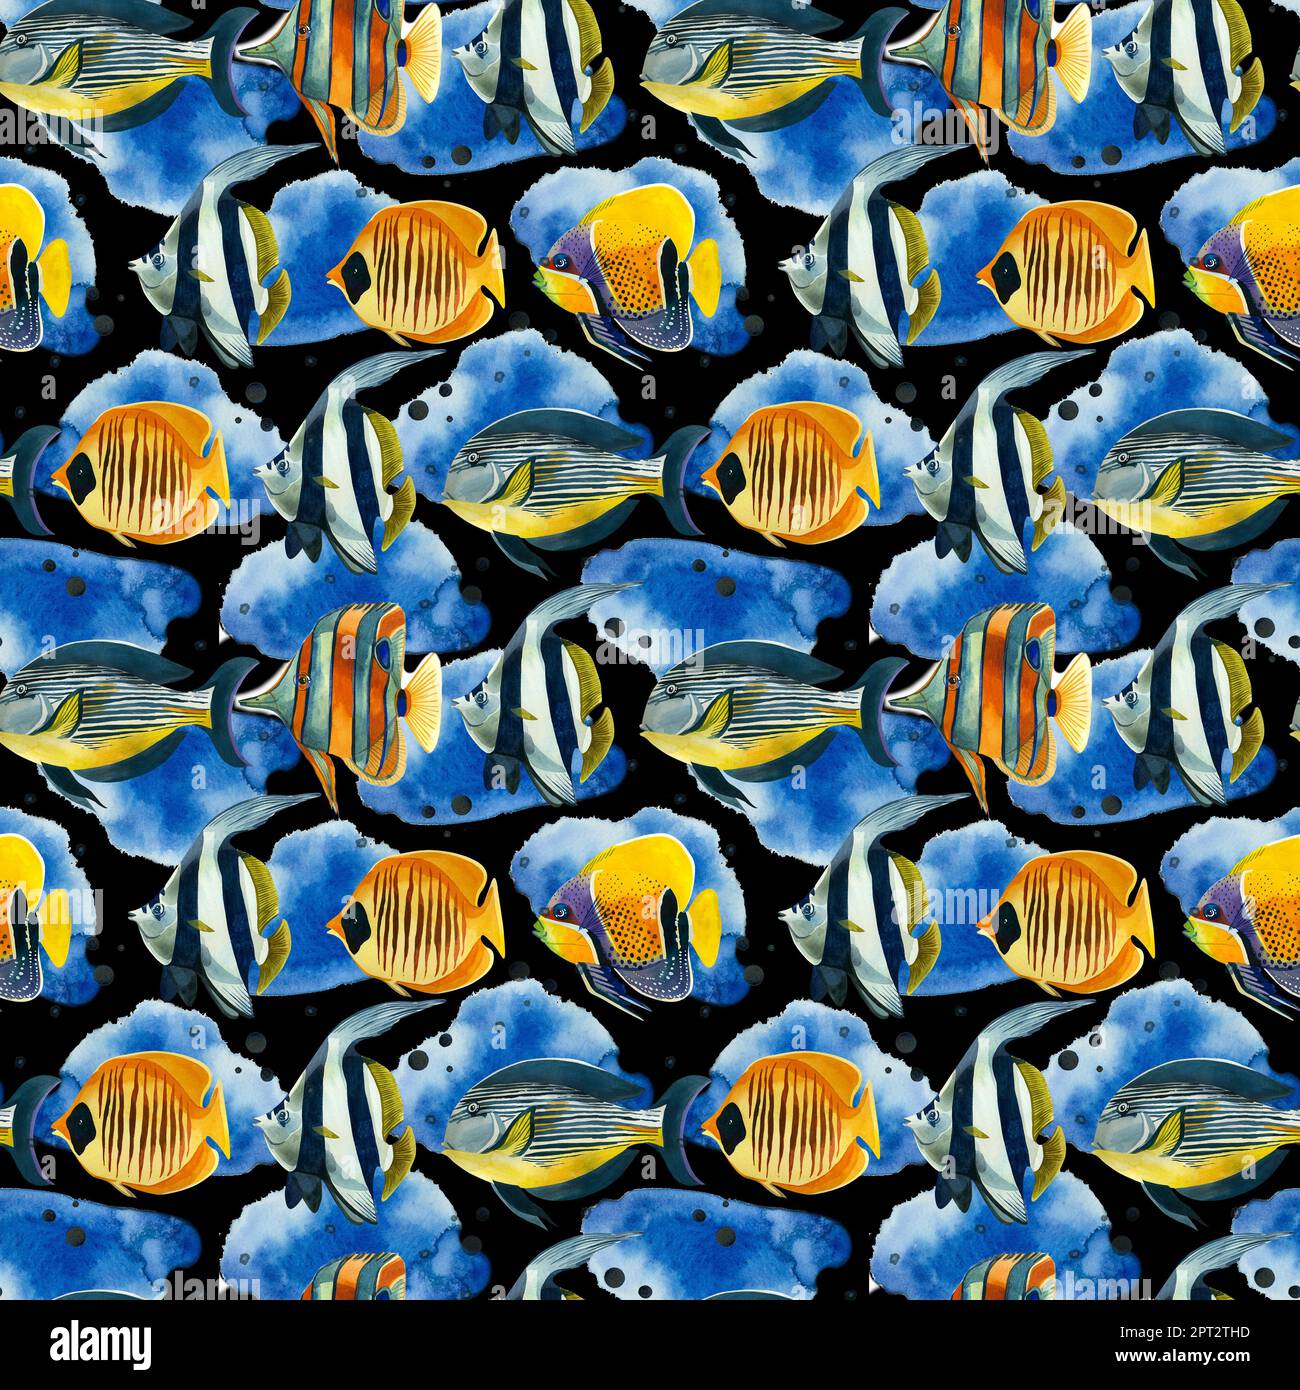 Seamless pattern. Tropical fish in bright colors and blue spots, hand-drawn in watercolor on a black background. Suitable for printing on fabric Stock Photo